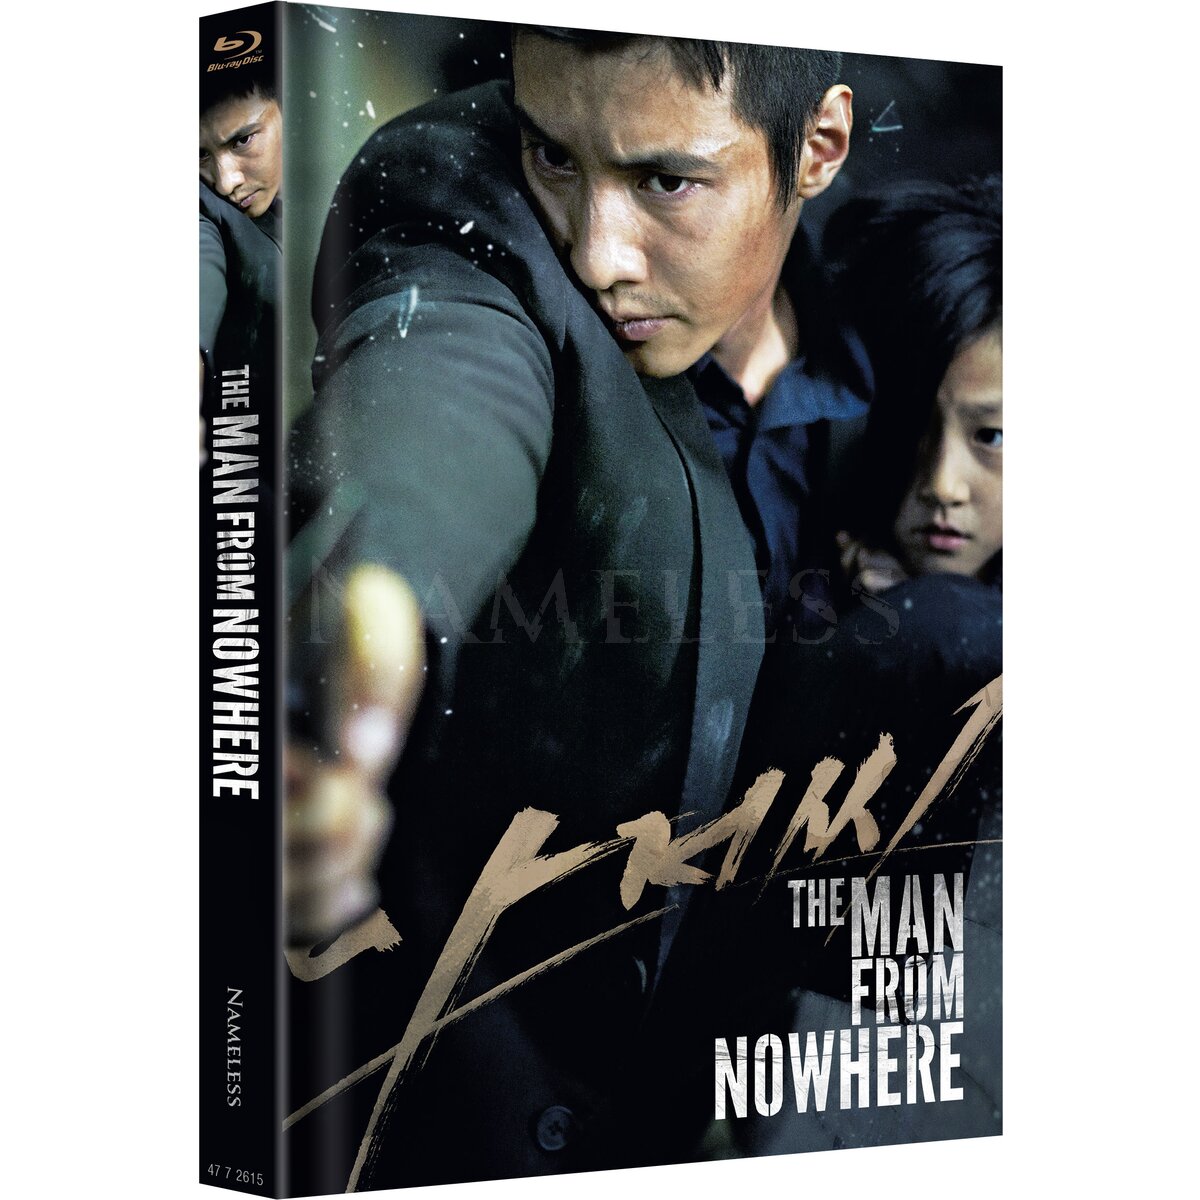 THE MAN FROM NOWHERE – COVER B – JACKET